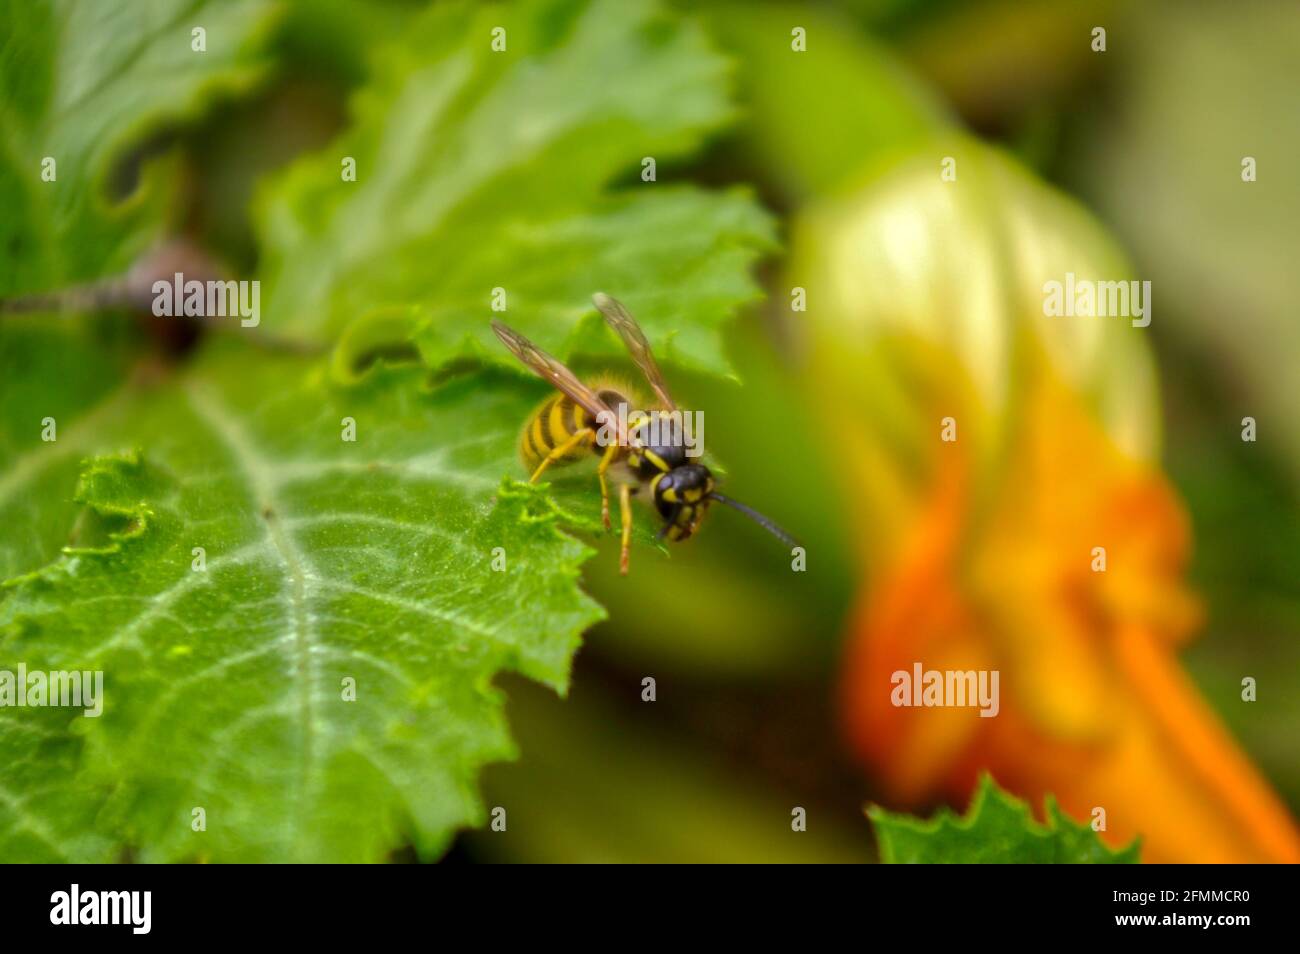 Macro shot of an Asian Hornet on a bright green leaf in the garden Stock Photo